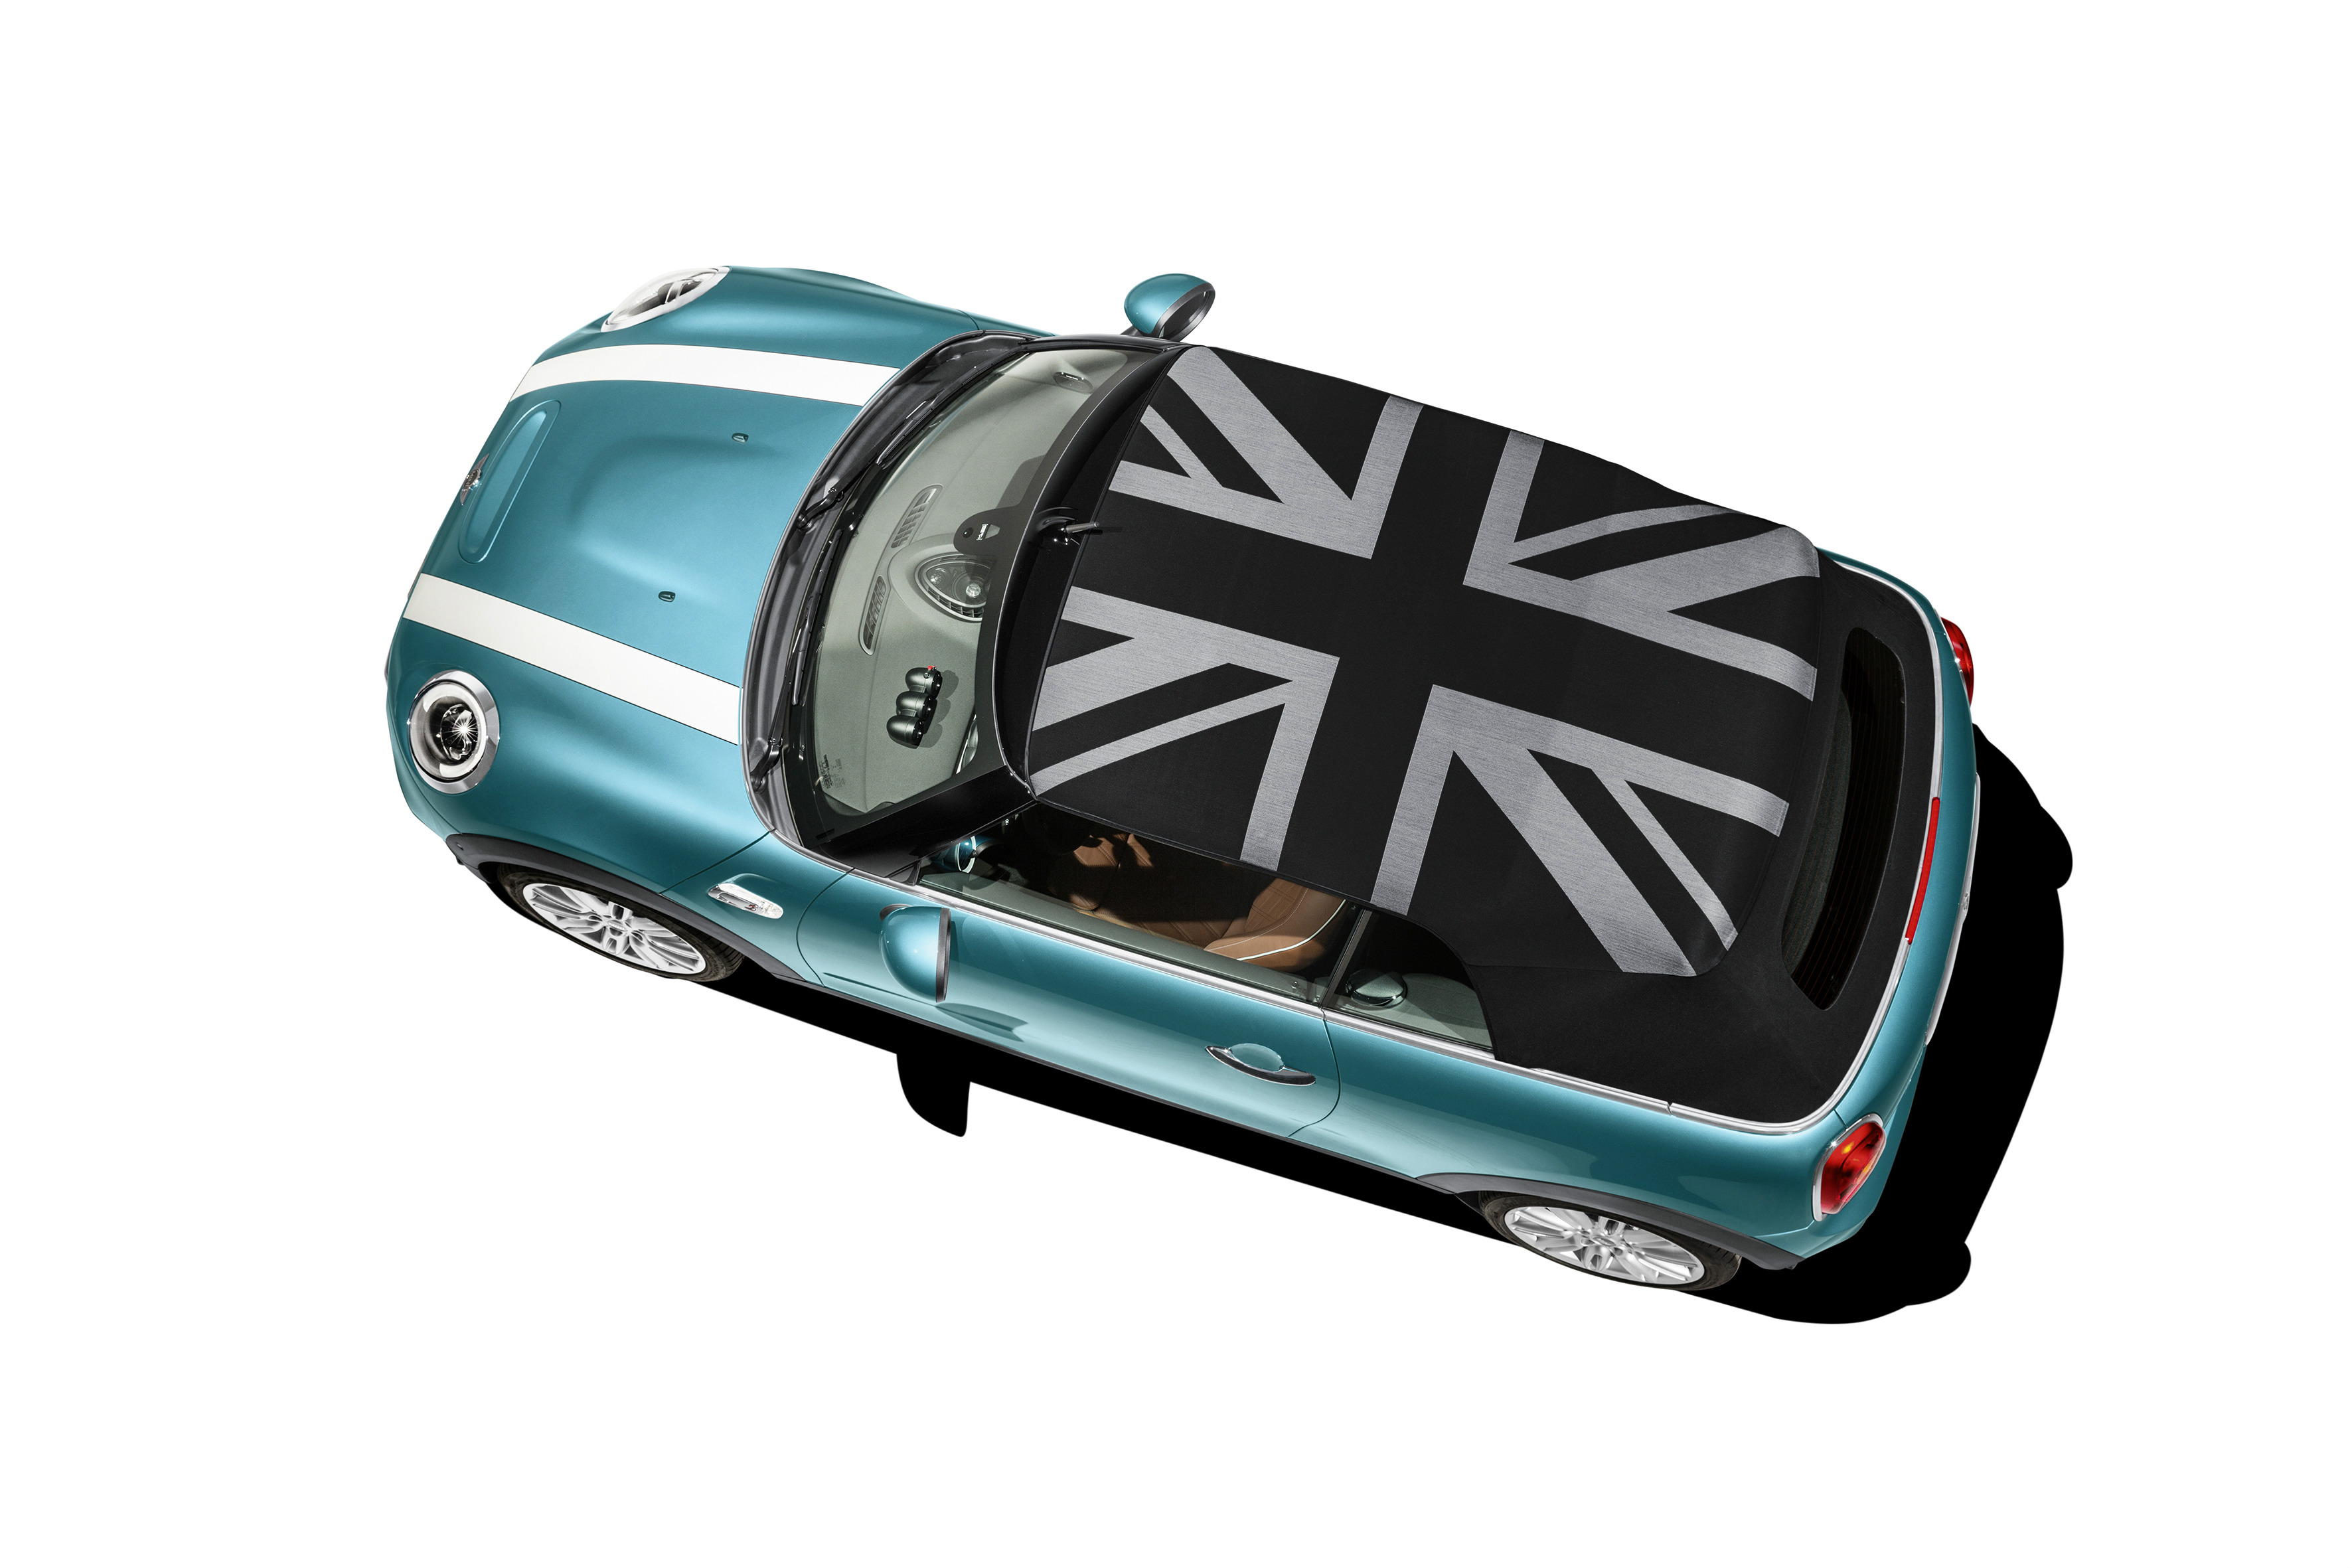 New 2015 Mini convertible first pictures, prices and details of Union Jack design roof